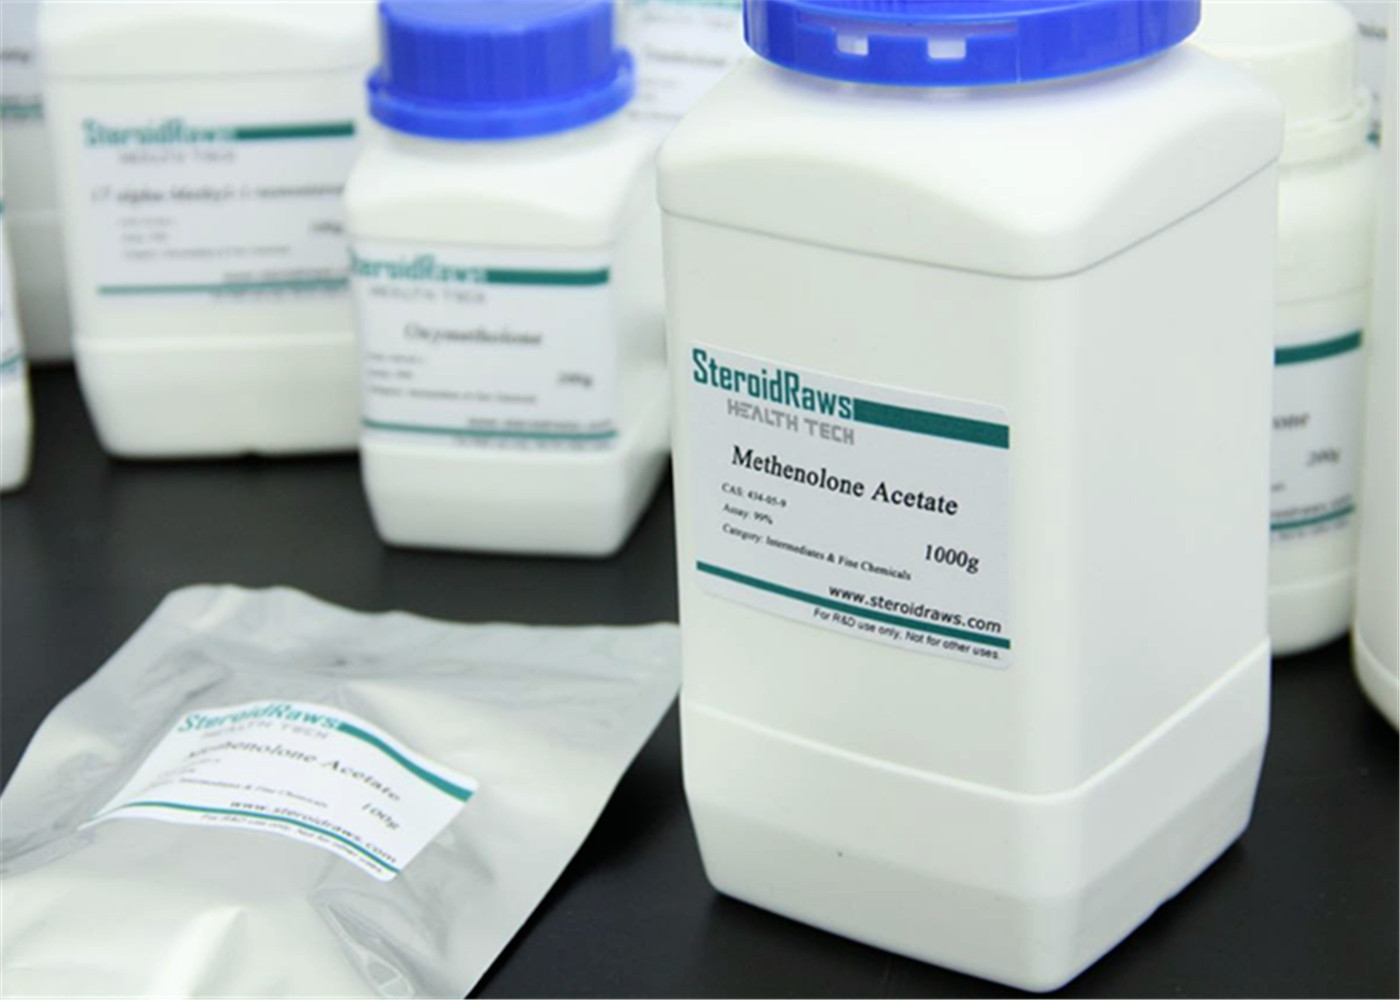 434-05-9 Primobolan Steroid , Methenolone Acetate Steroids for Muscle Growth